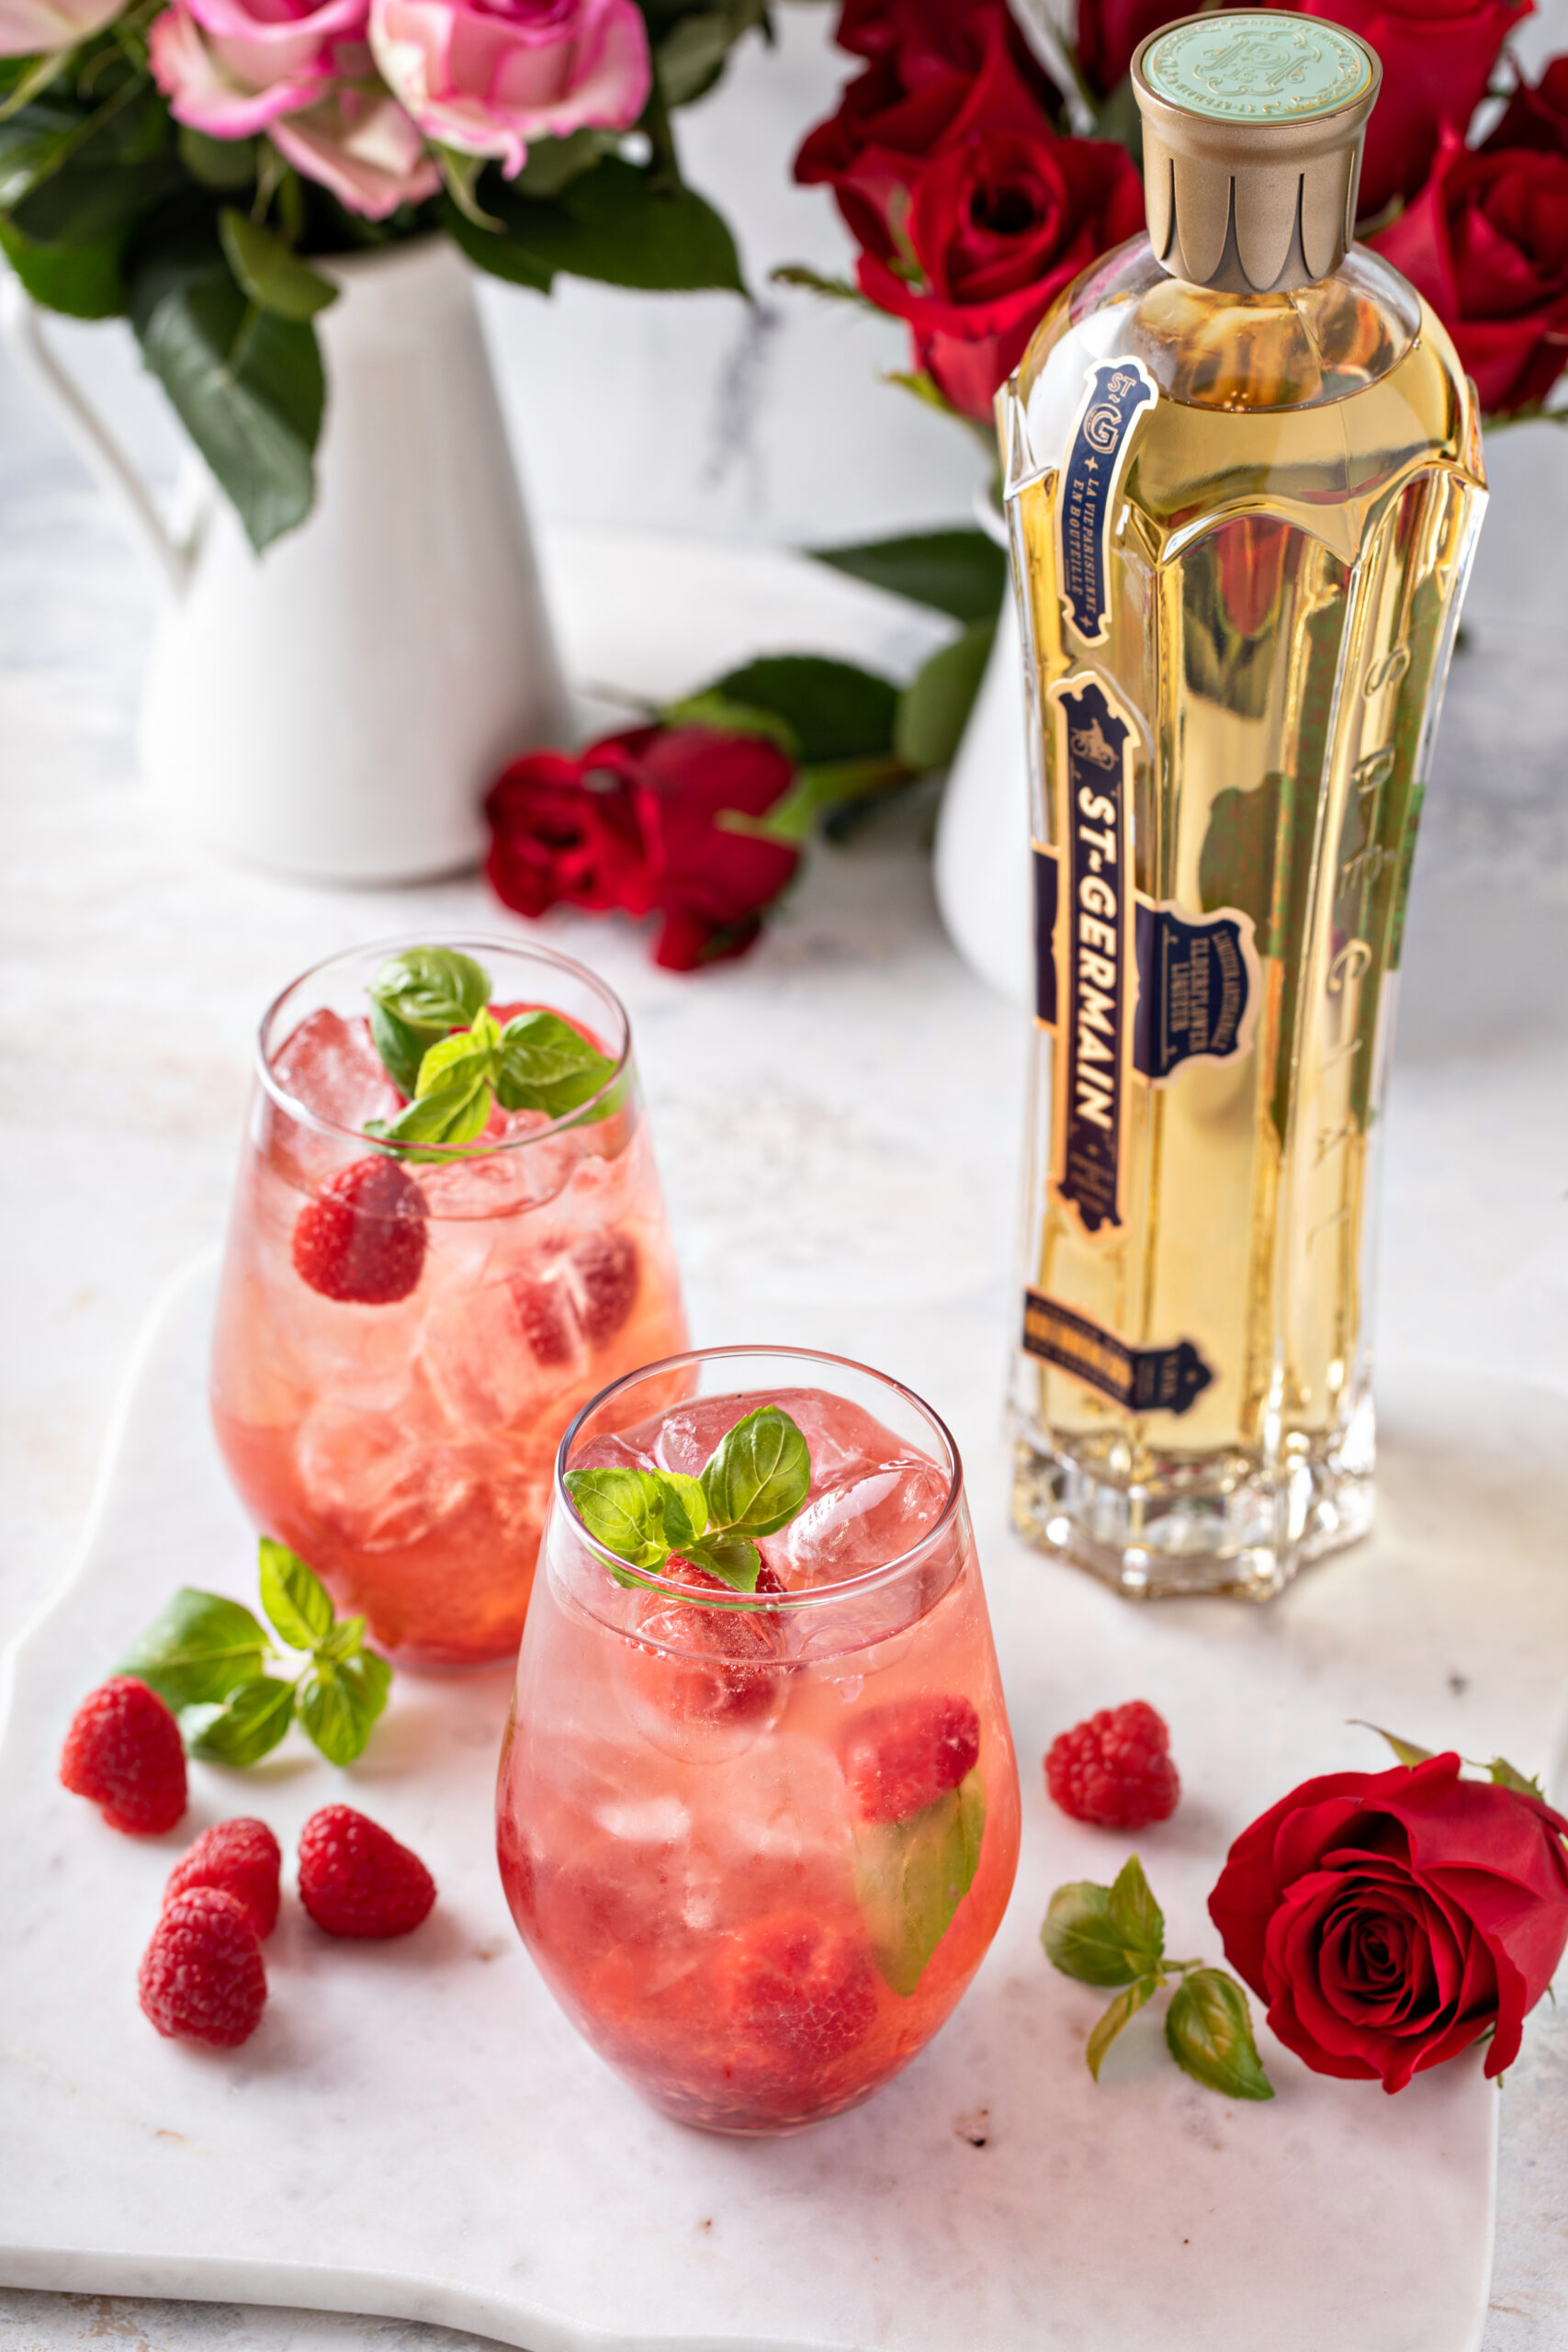 Looking for the perfect summertime cocktail? Eating with Erica is sharing the Perfect Summertime St Germain Cocktail that everyone needs to try this summer!